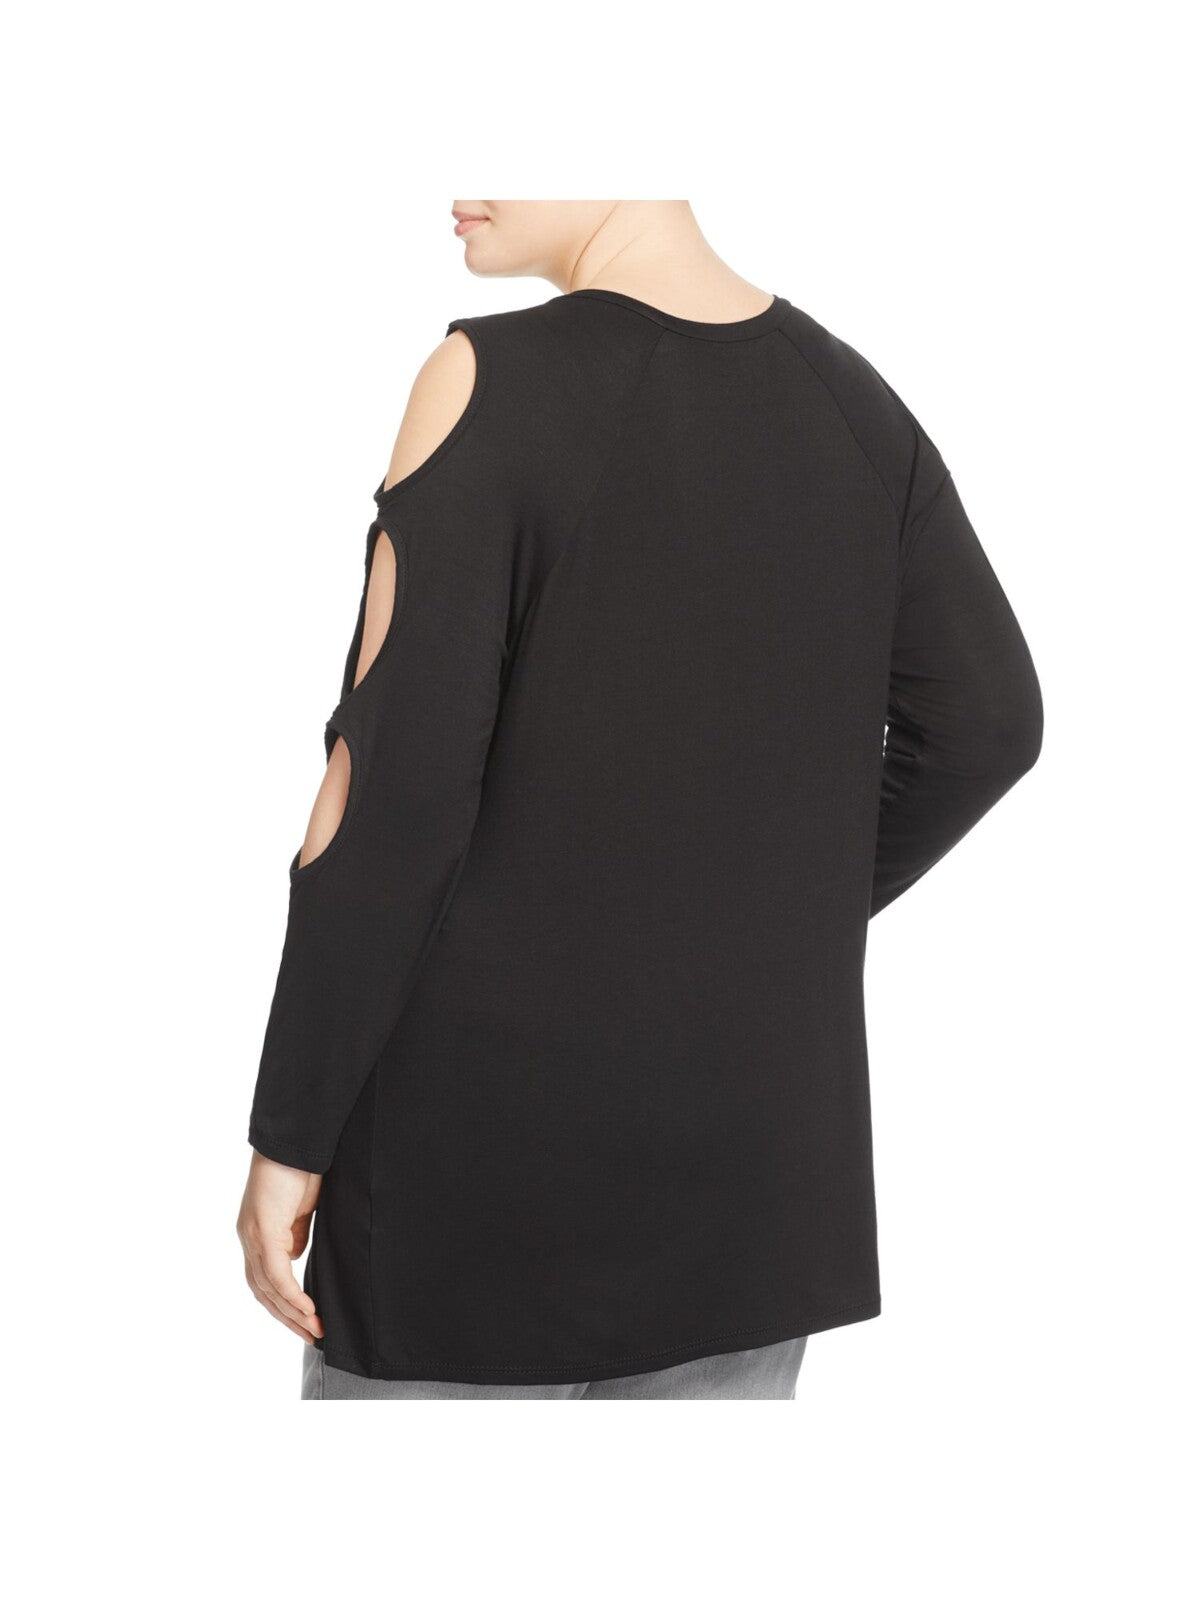 ALISON ANDREWS Womens Black Stretch Cold Shoulder Cut Out Long Sleeve Round Neck Tunic Top Plus 2XL